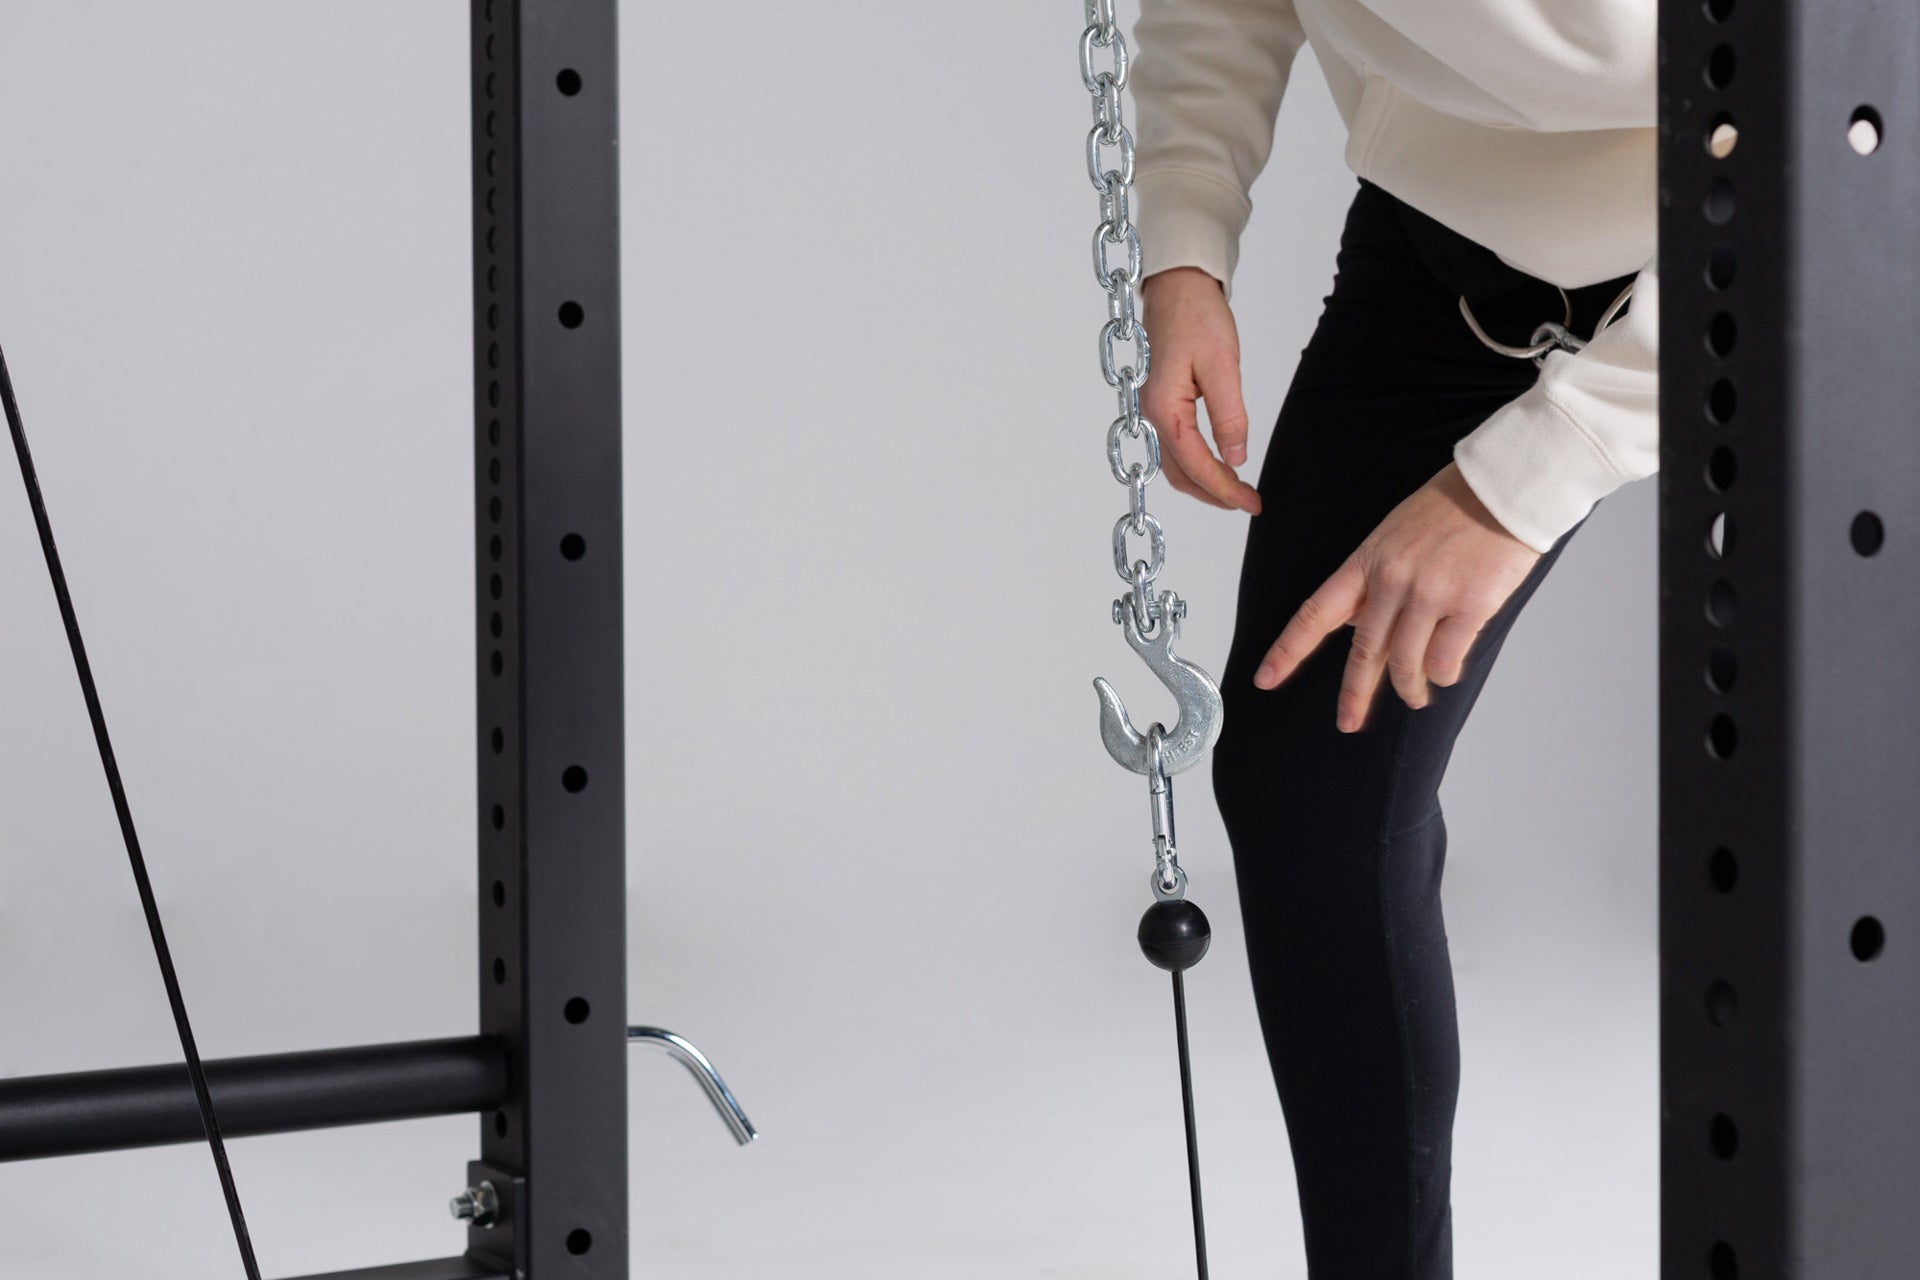 Cable Catch Connected to Belt Squat Attachment With Model In the Standing and Starting Position